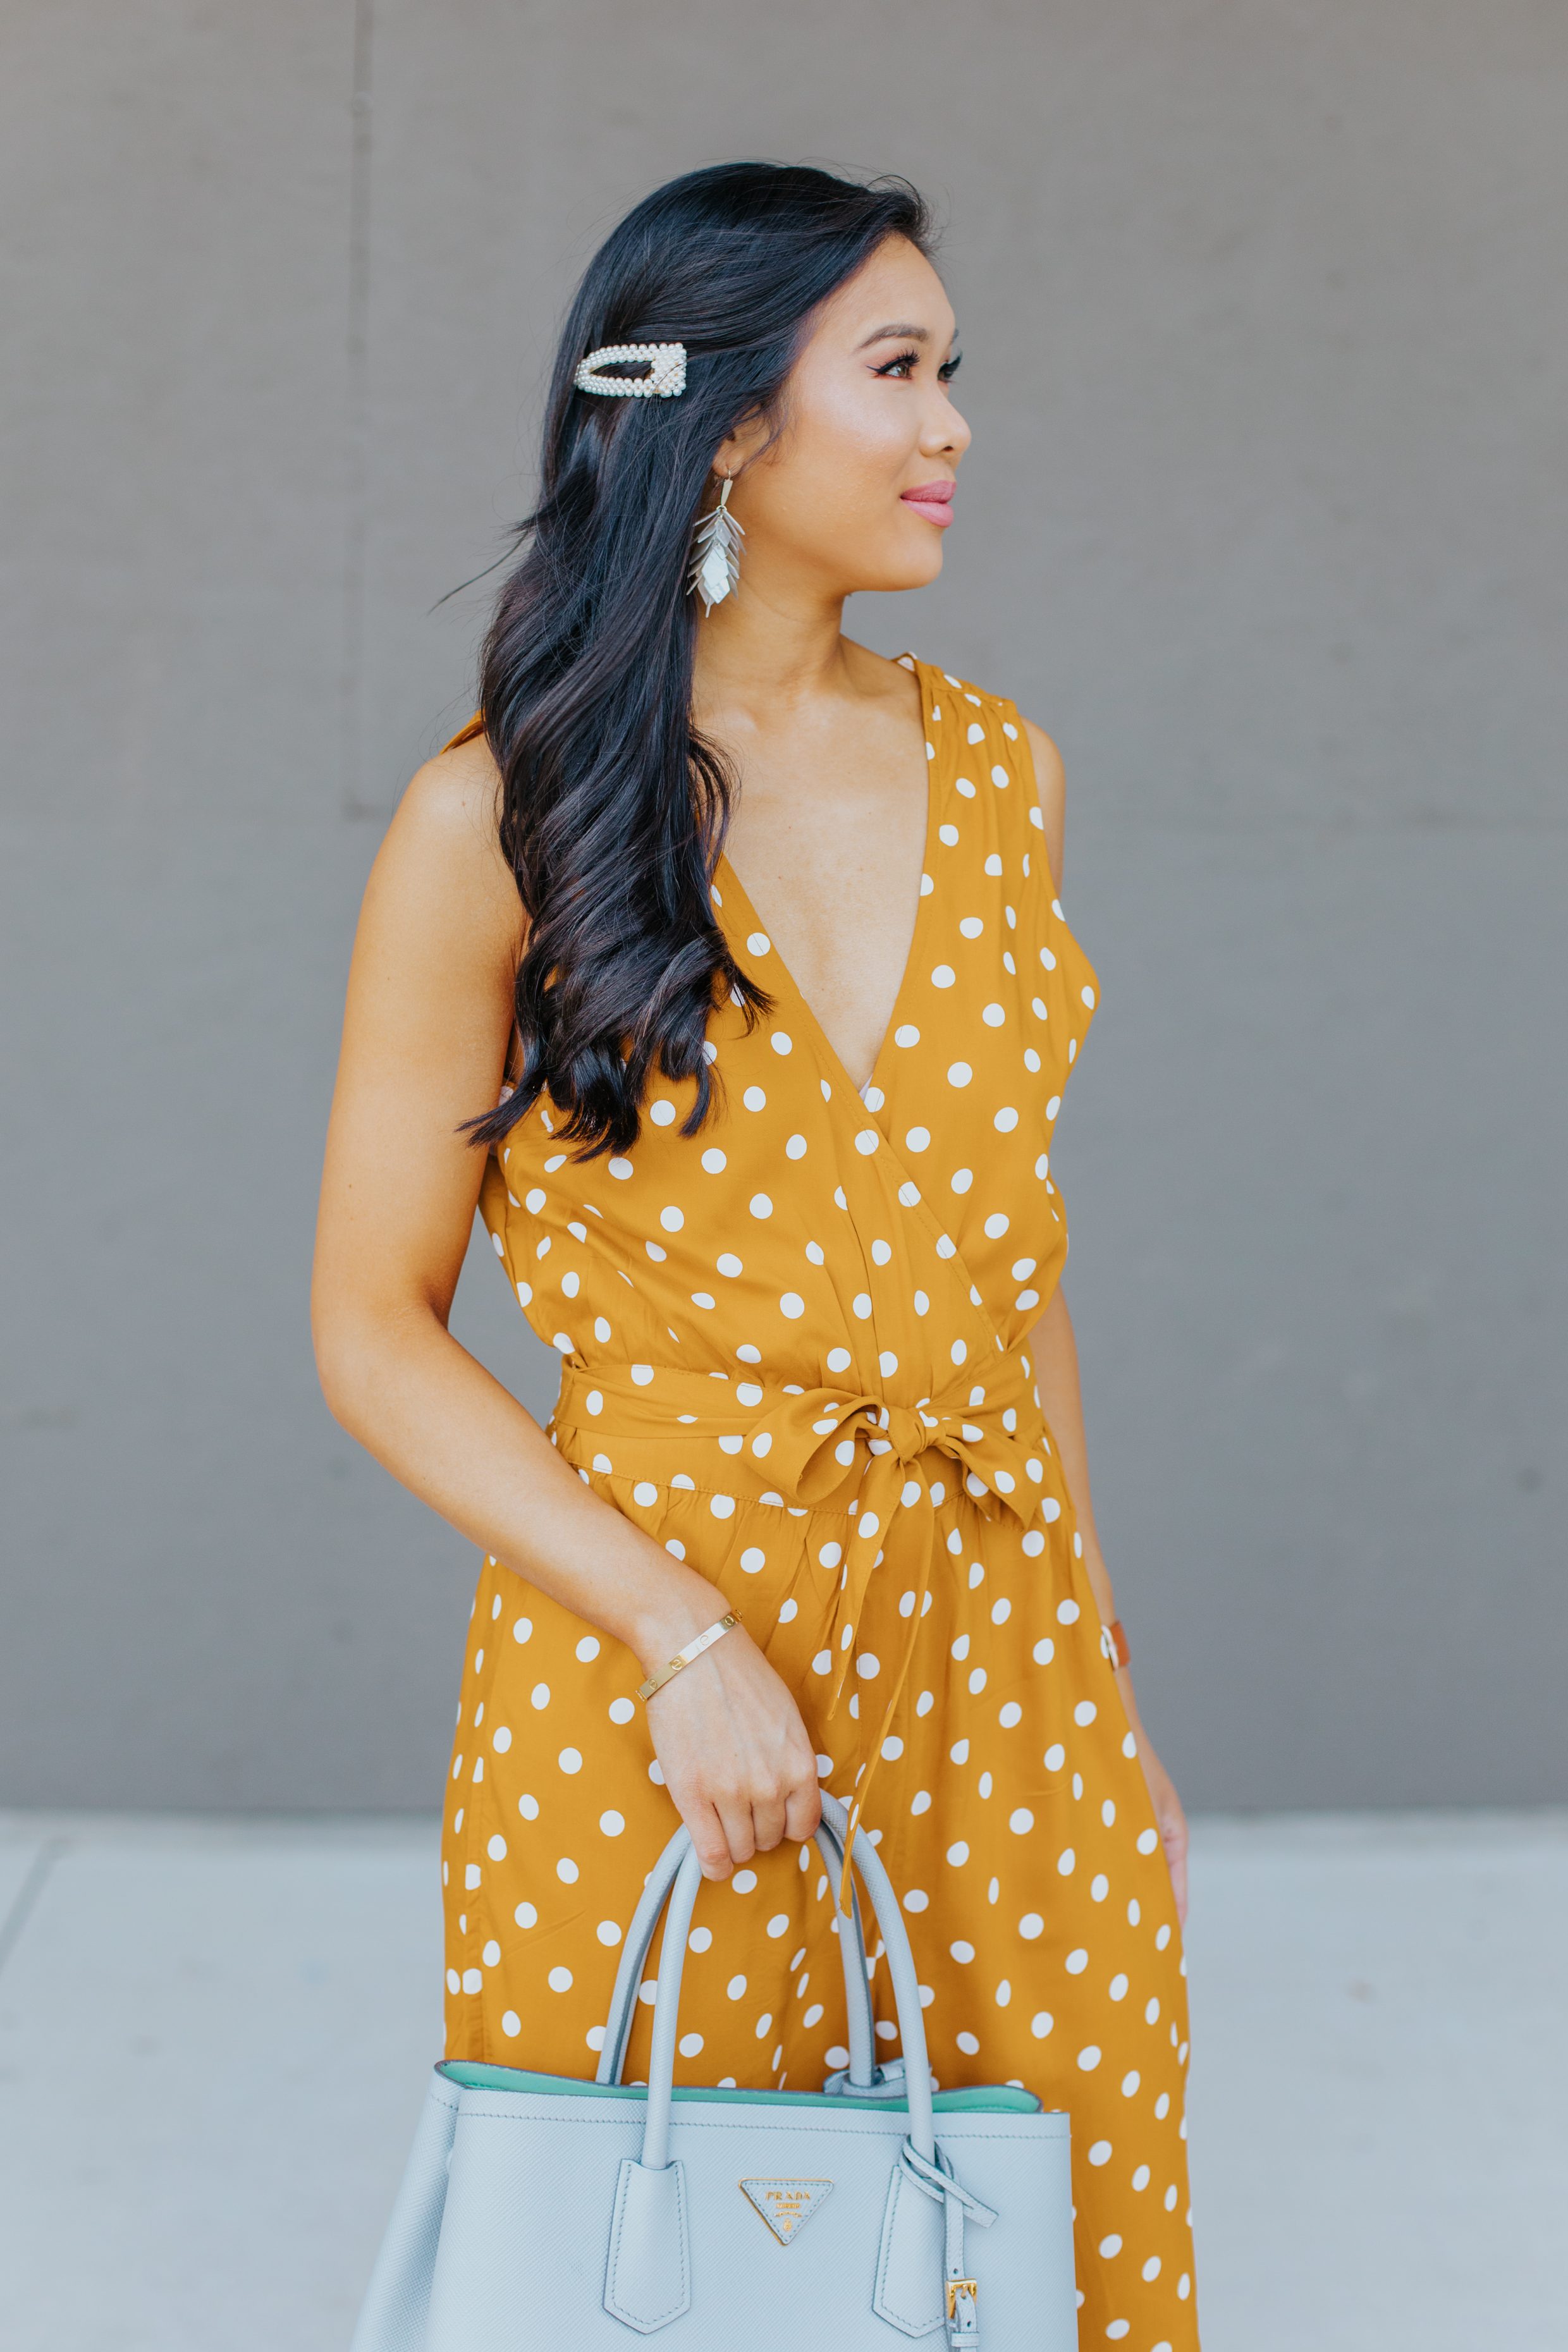 Blogger Hoang-Kim shares four ways to wear yellow for spring